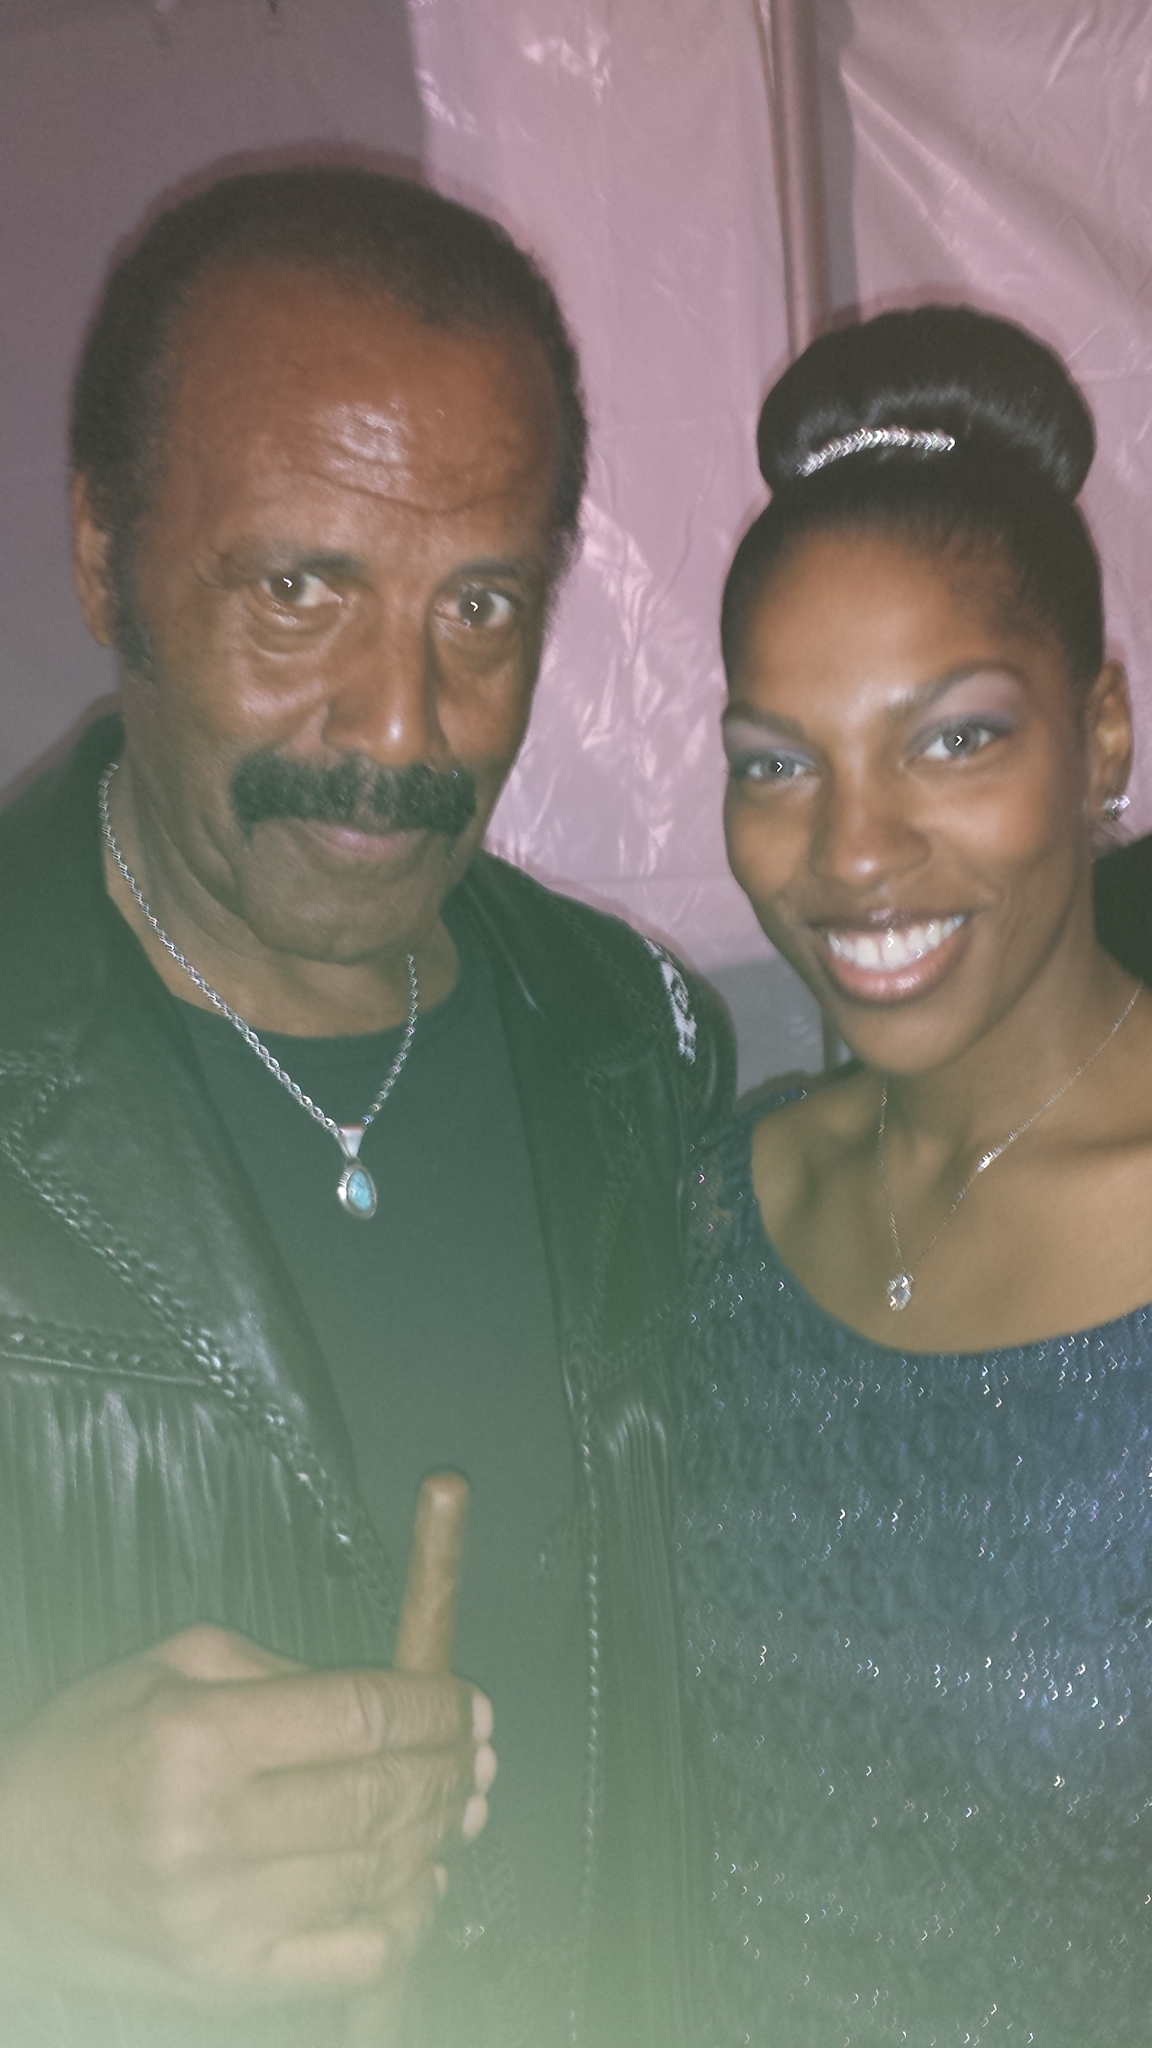 Texas Film Awards on the red carpet with Fred Williamson. From Dusk Till Dawn honored in the Hall of Fame.